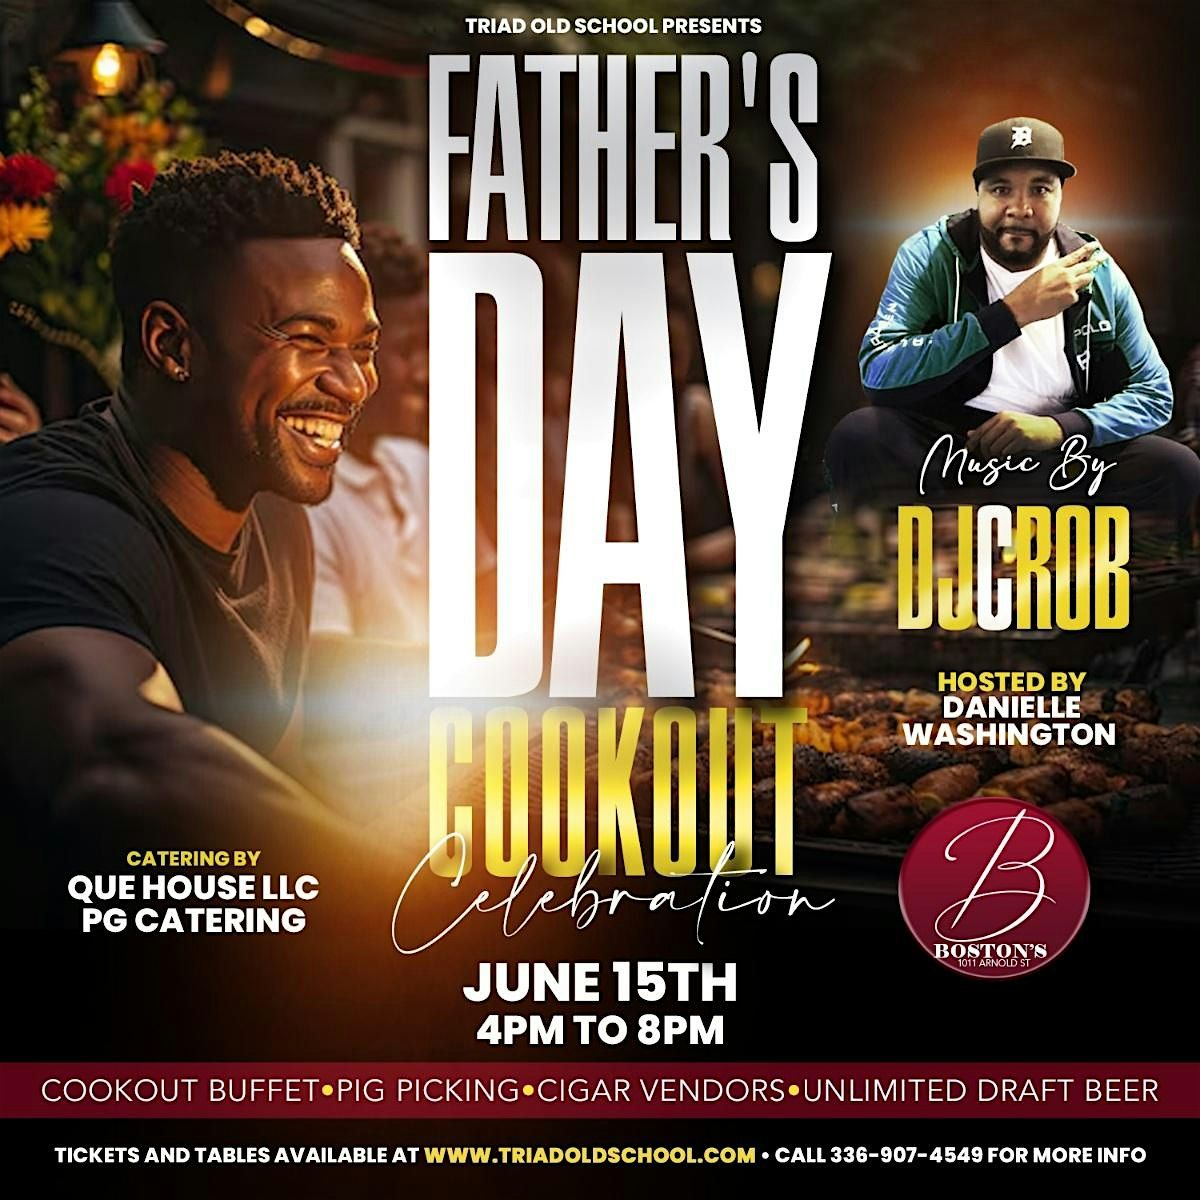 Father's Day Cookout  Hosted By Danielle Washington